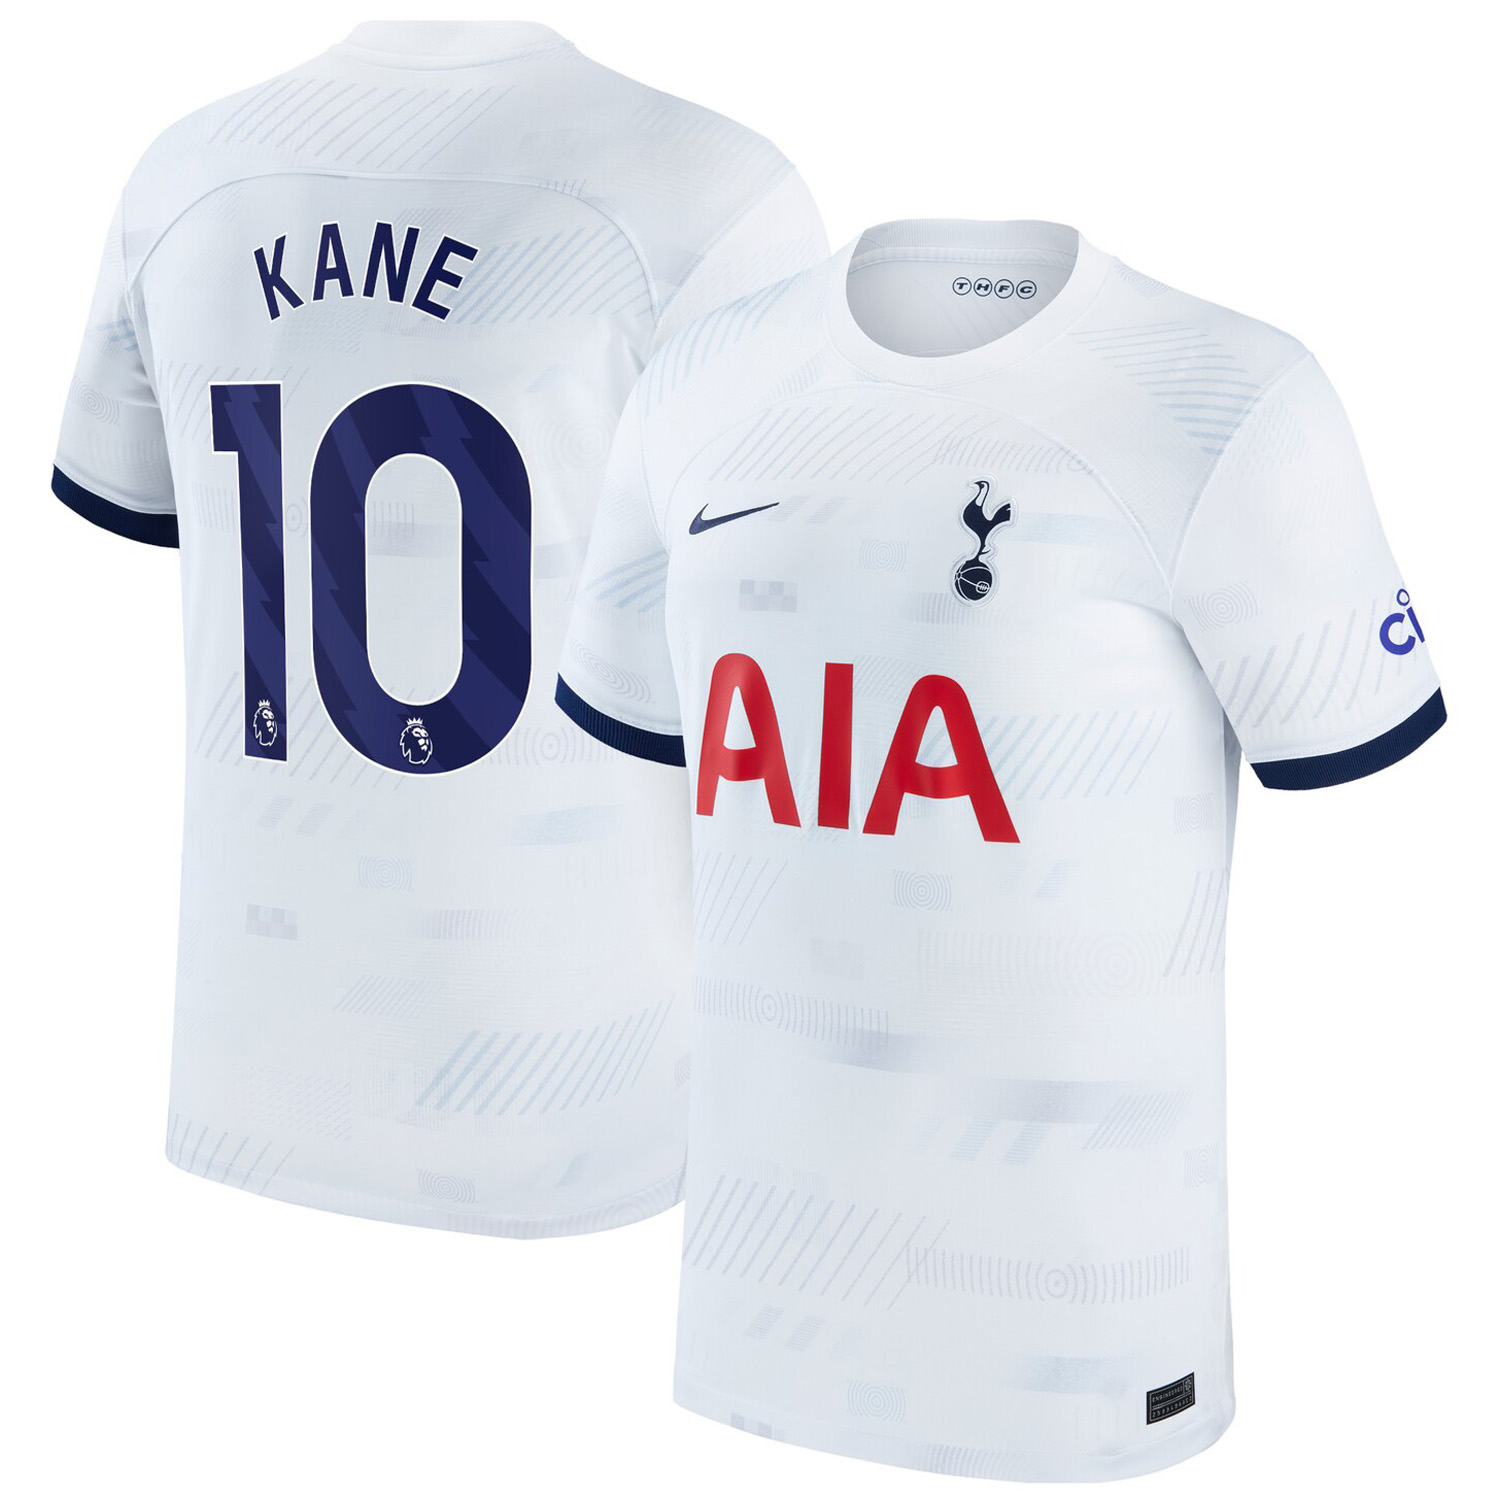 Order Spurs away 23/24 kit Online From The club.jersey